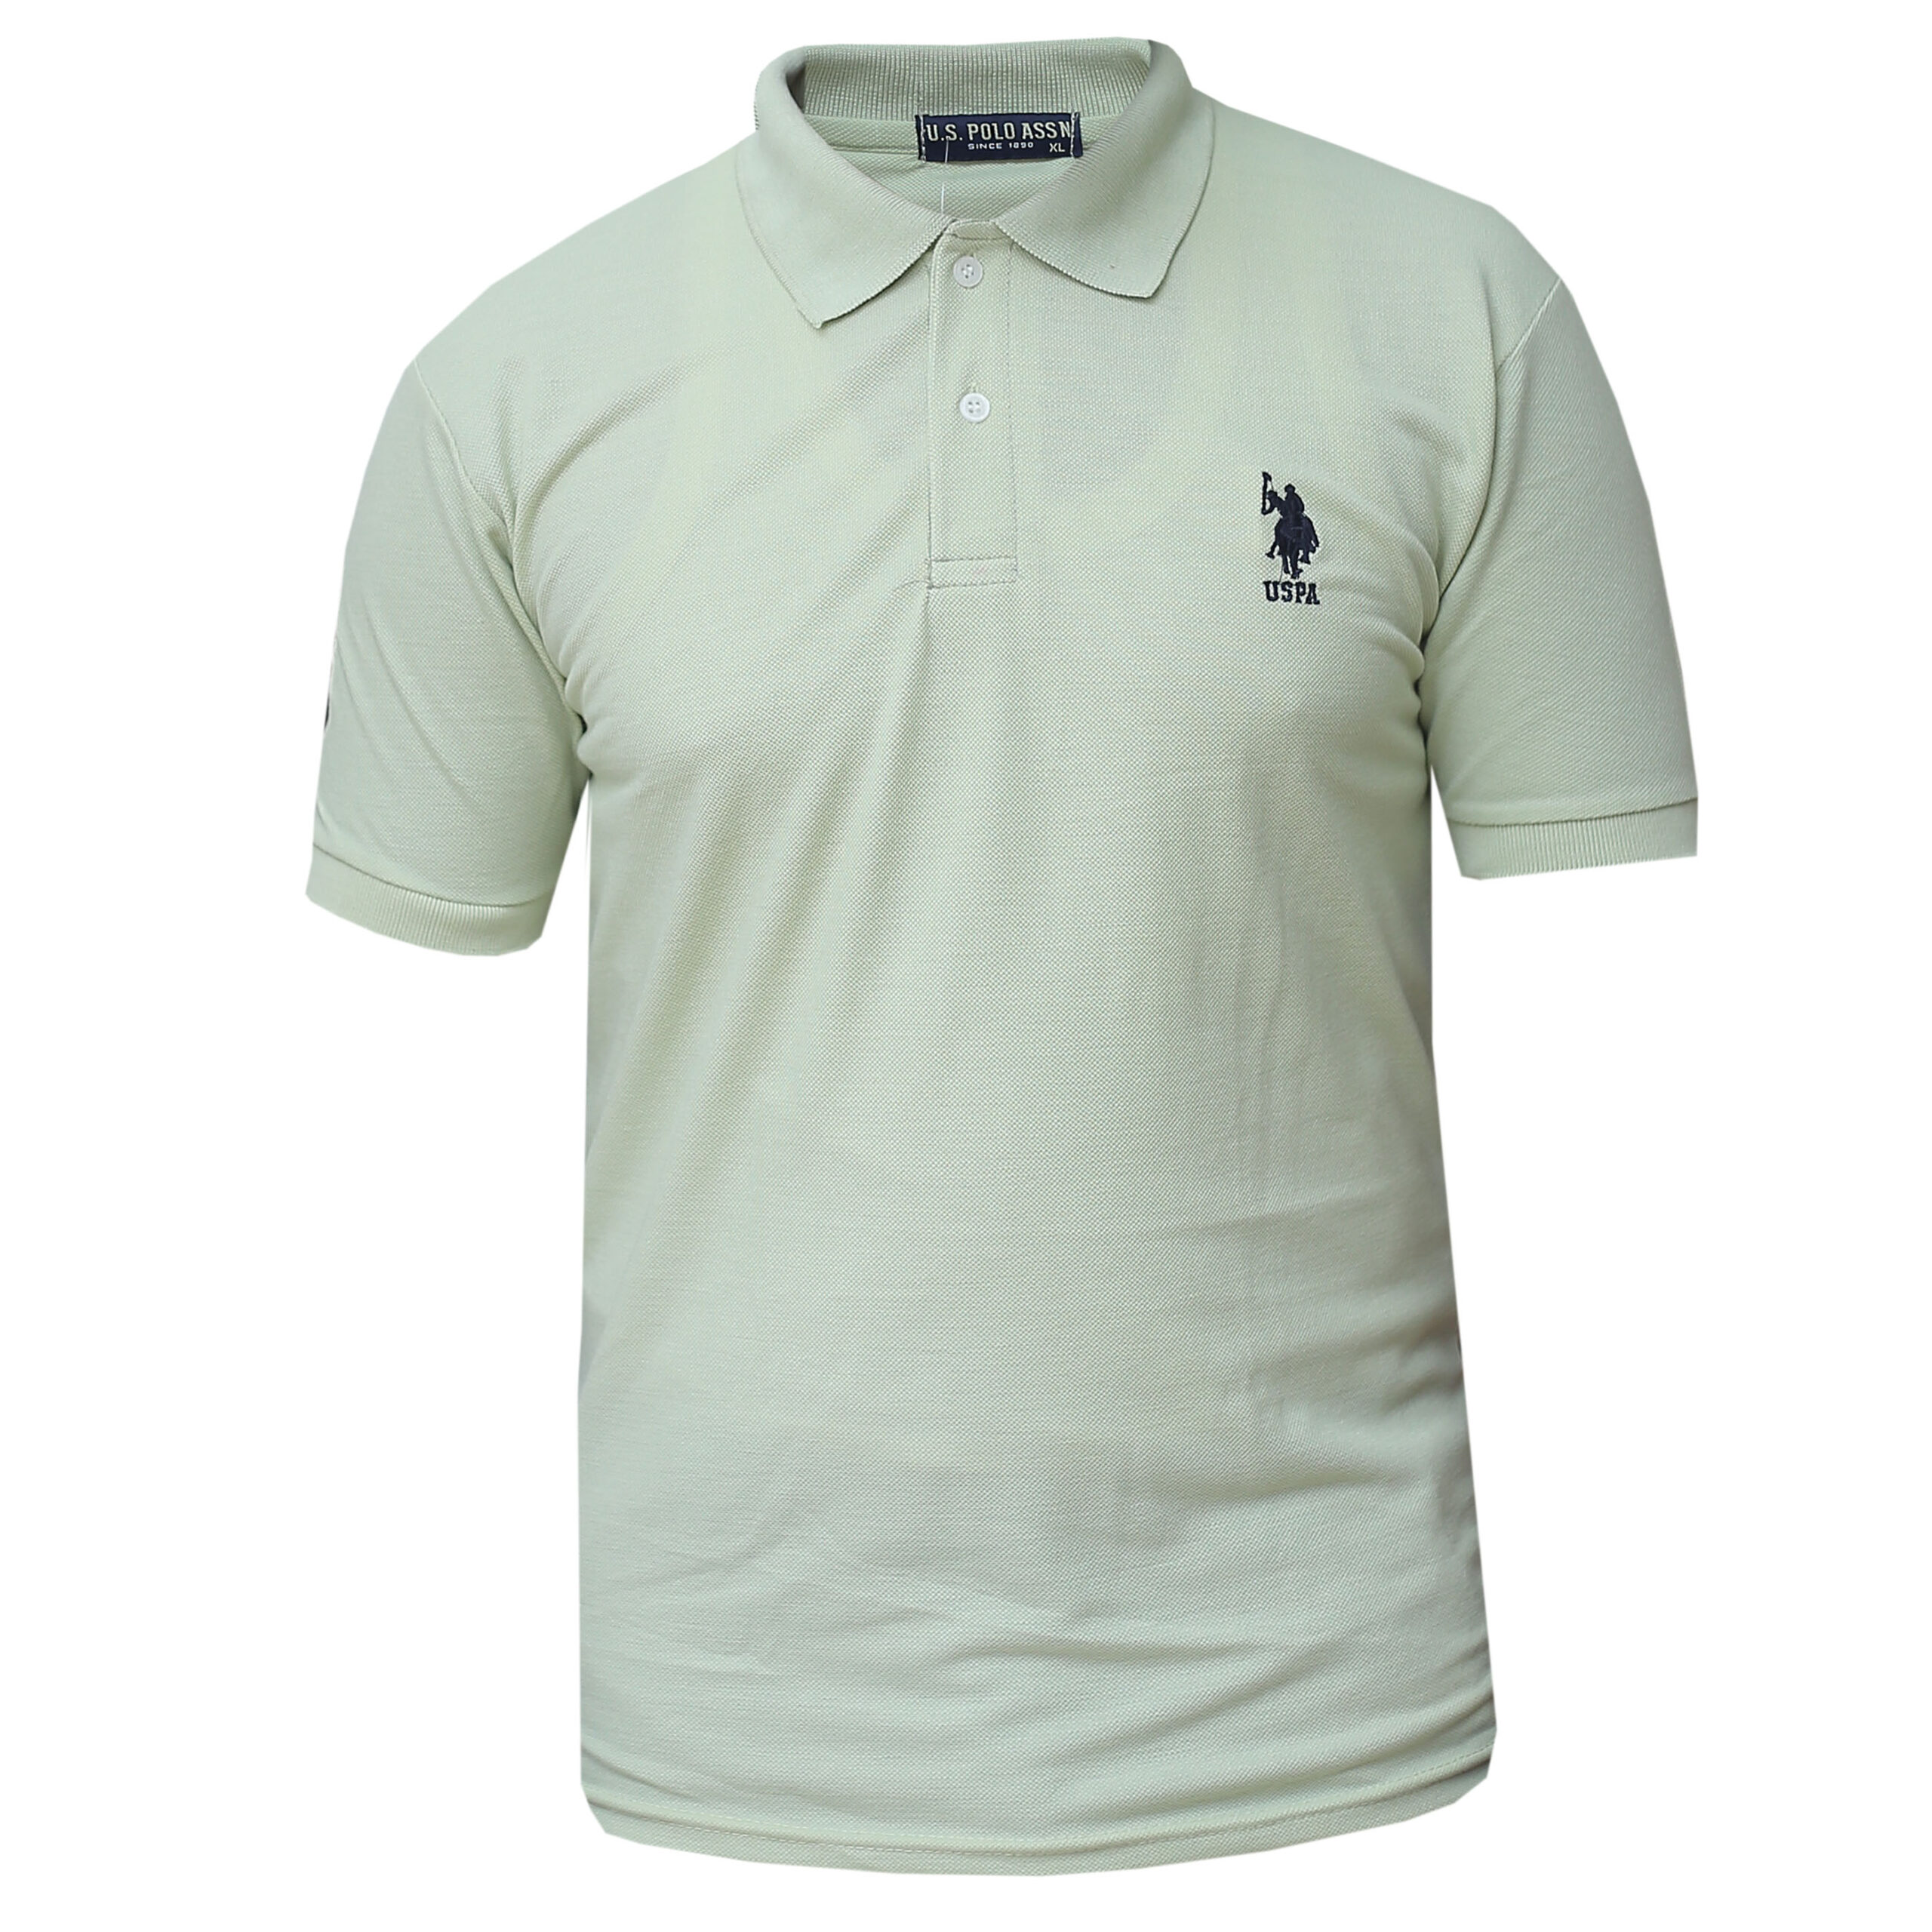 Men's Polo T-Shirts - Smart Casual T-Shirt with Collar